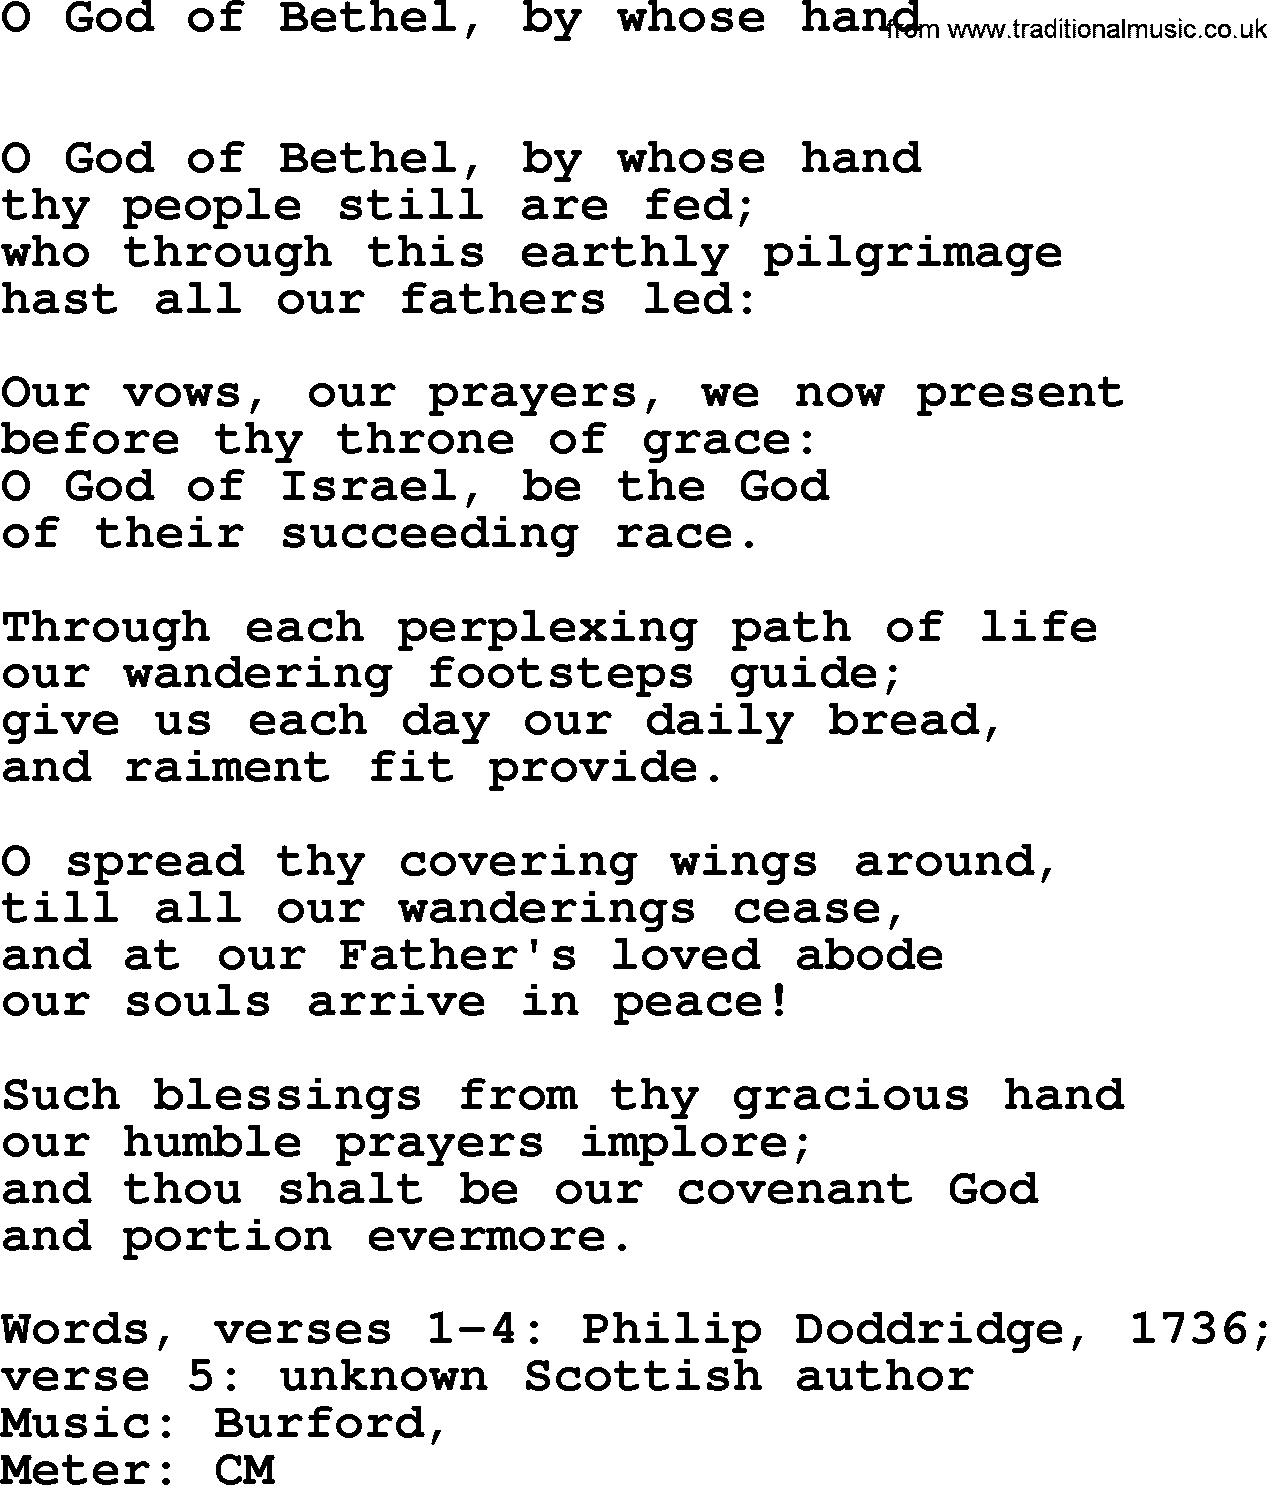 Book of Common Praise Hymn: O God Of Bethel, By Whose Hand.txt lyrics with midi music